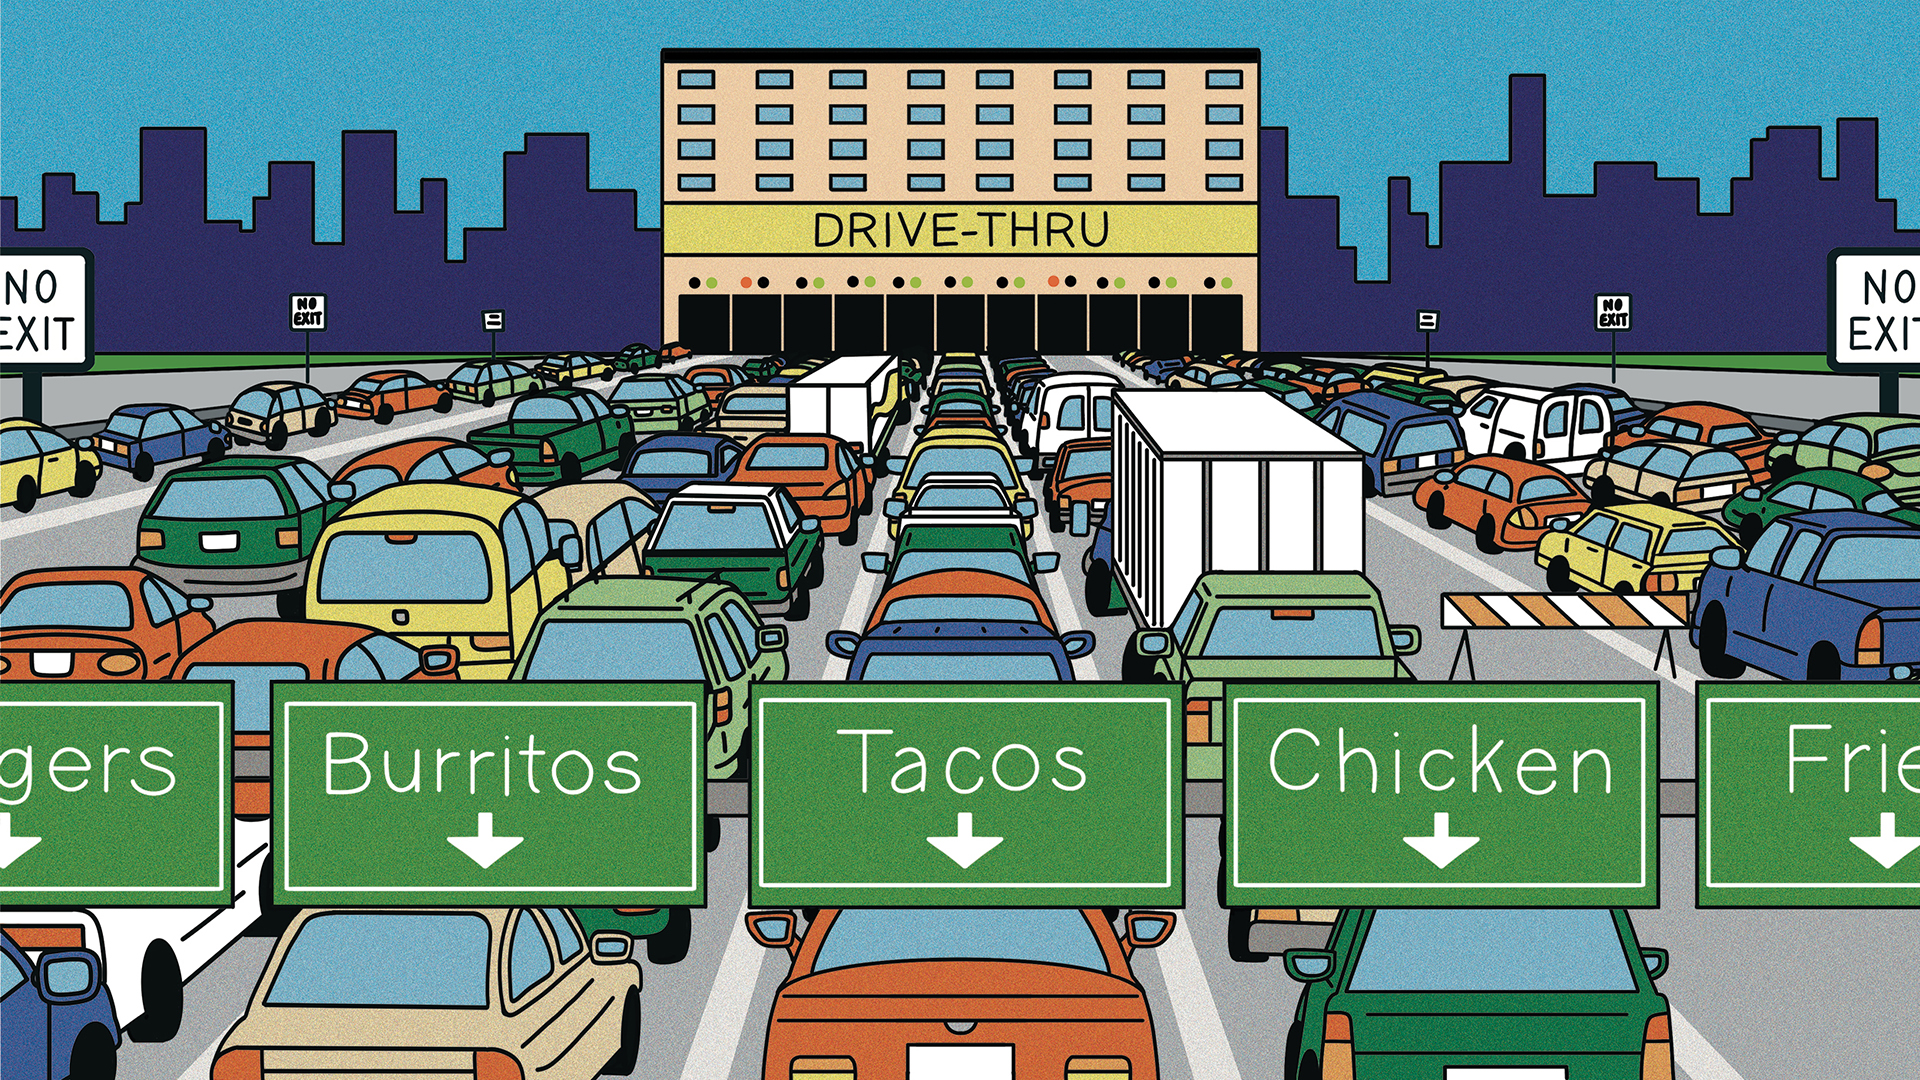 An illustration of a multi-lane highway filled with heavy car traffic leading to a giant structure labeled “Drive-thru.” There are green highway signs labeling the lanes “Burritos,” “Tacos,” “Chicken,” and “fries.” There’s a blue cityscape in the background.